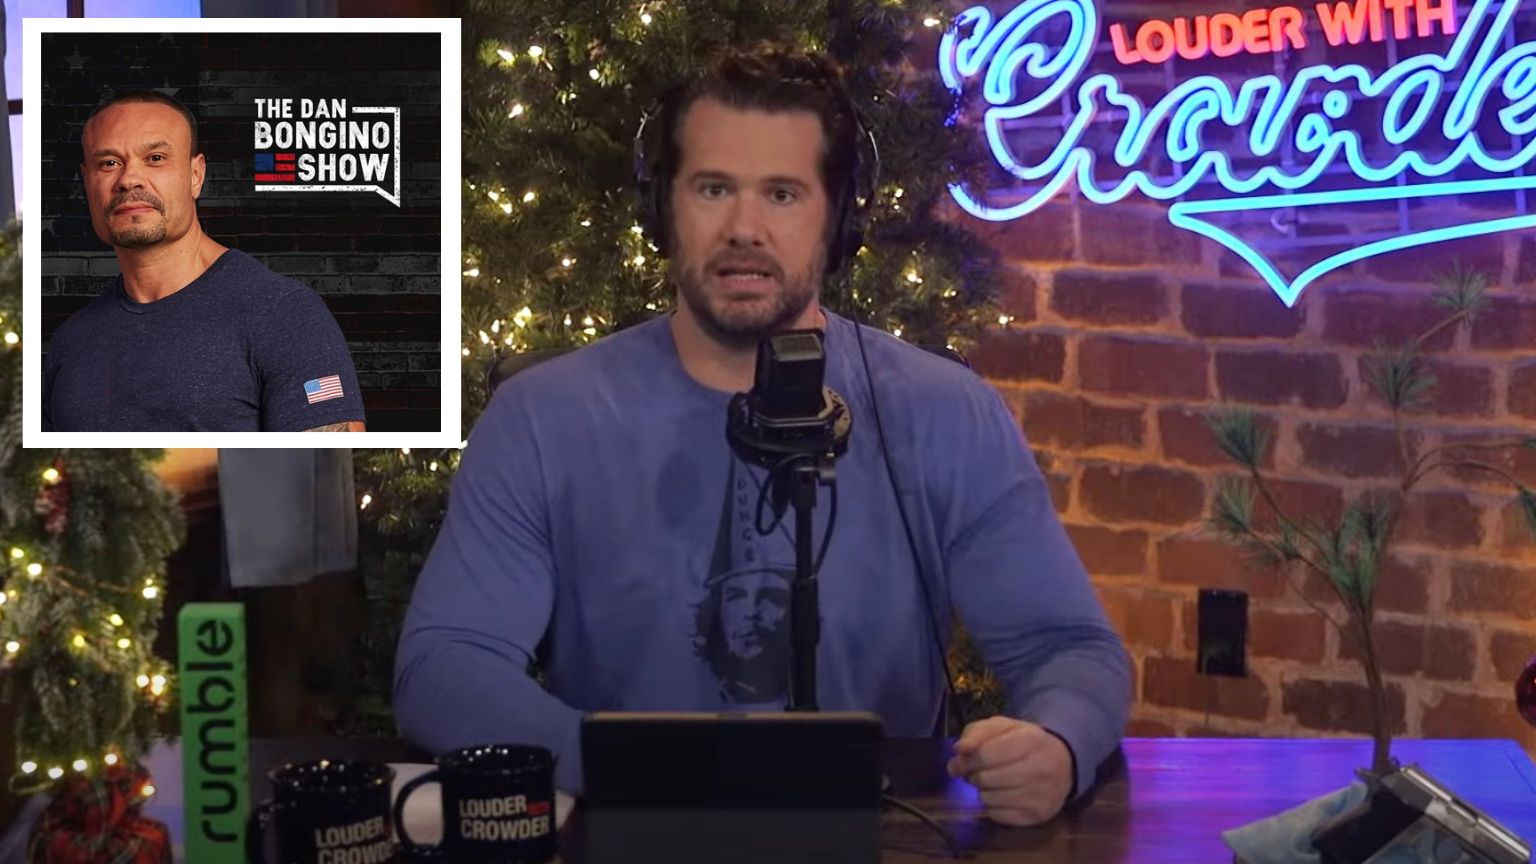 Steven Crowder Tells Viewers “You Need To Start Watching on Rumble” After YouTube Suspends Him for Episode Featuring Dan Bongino